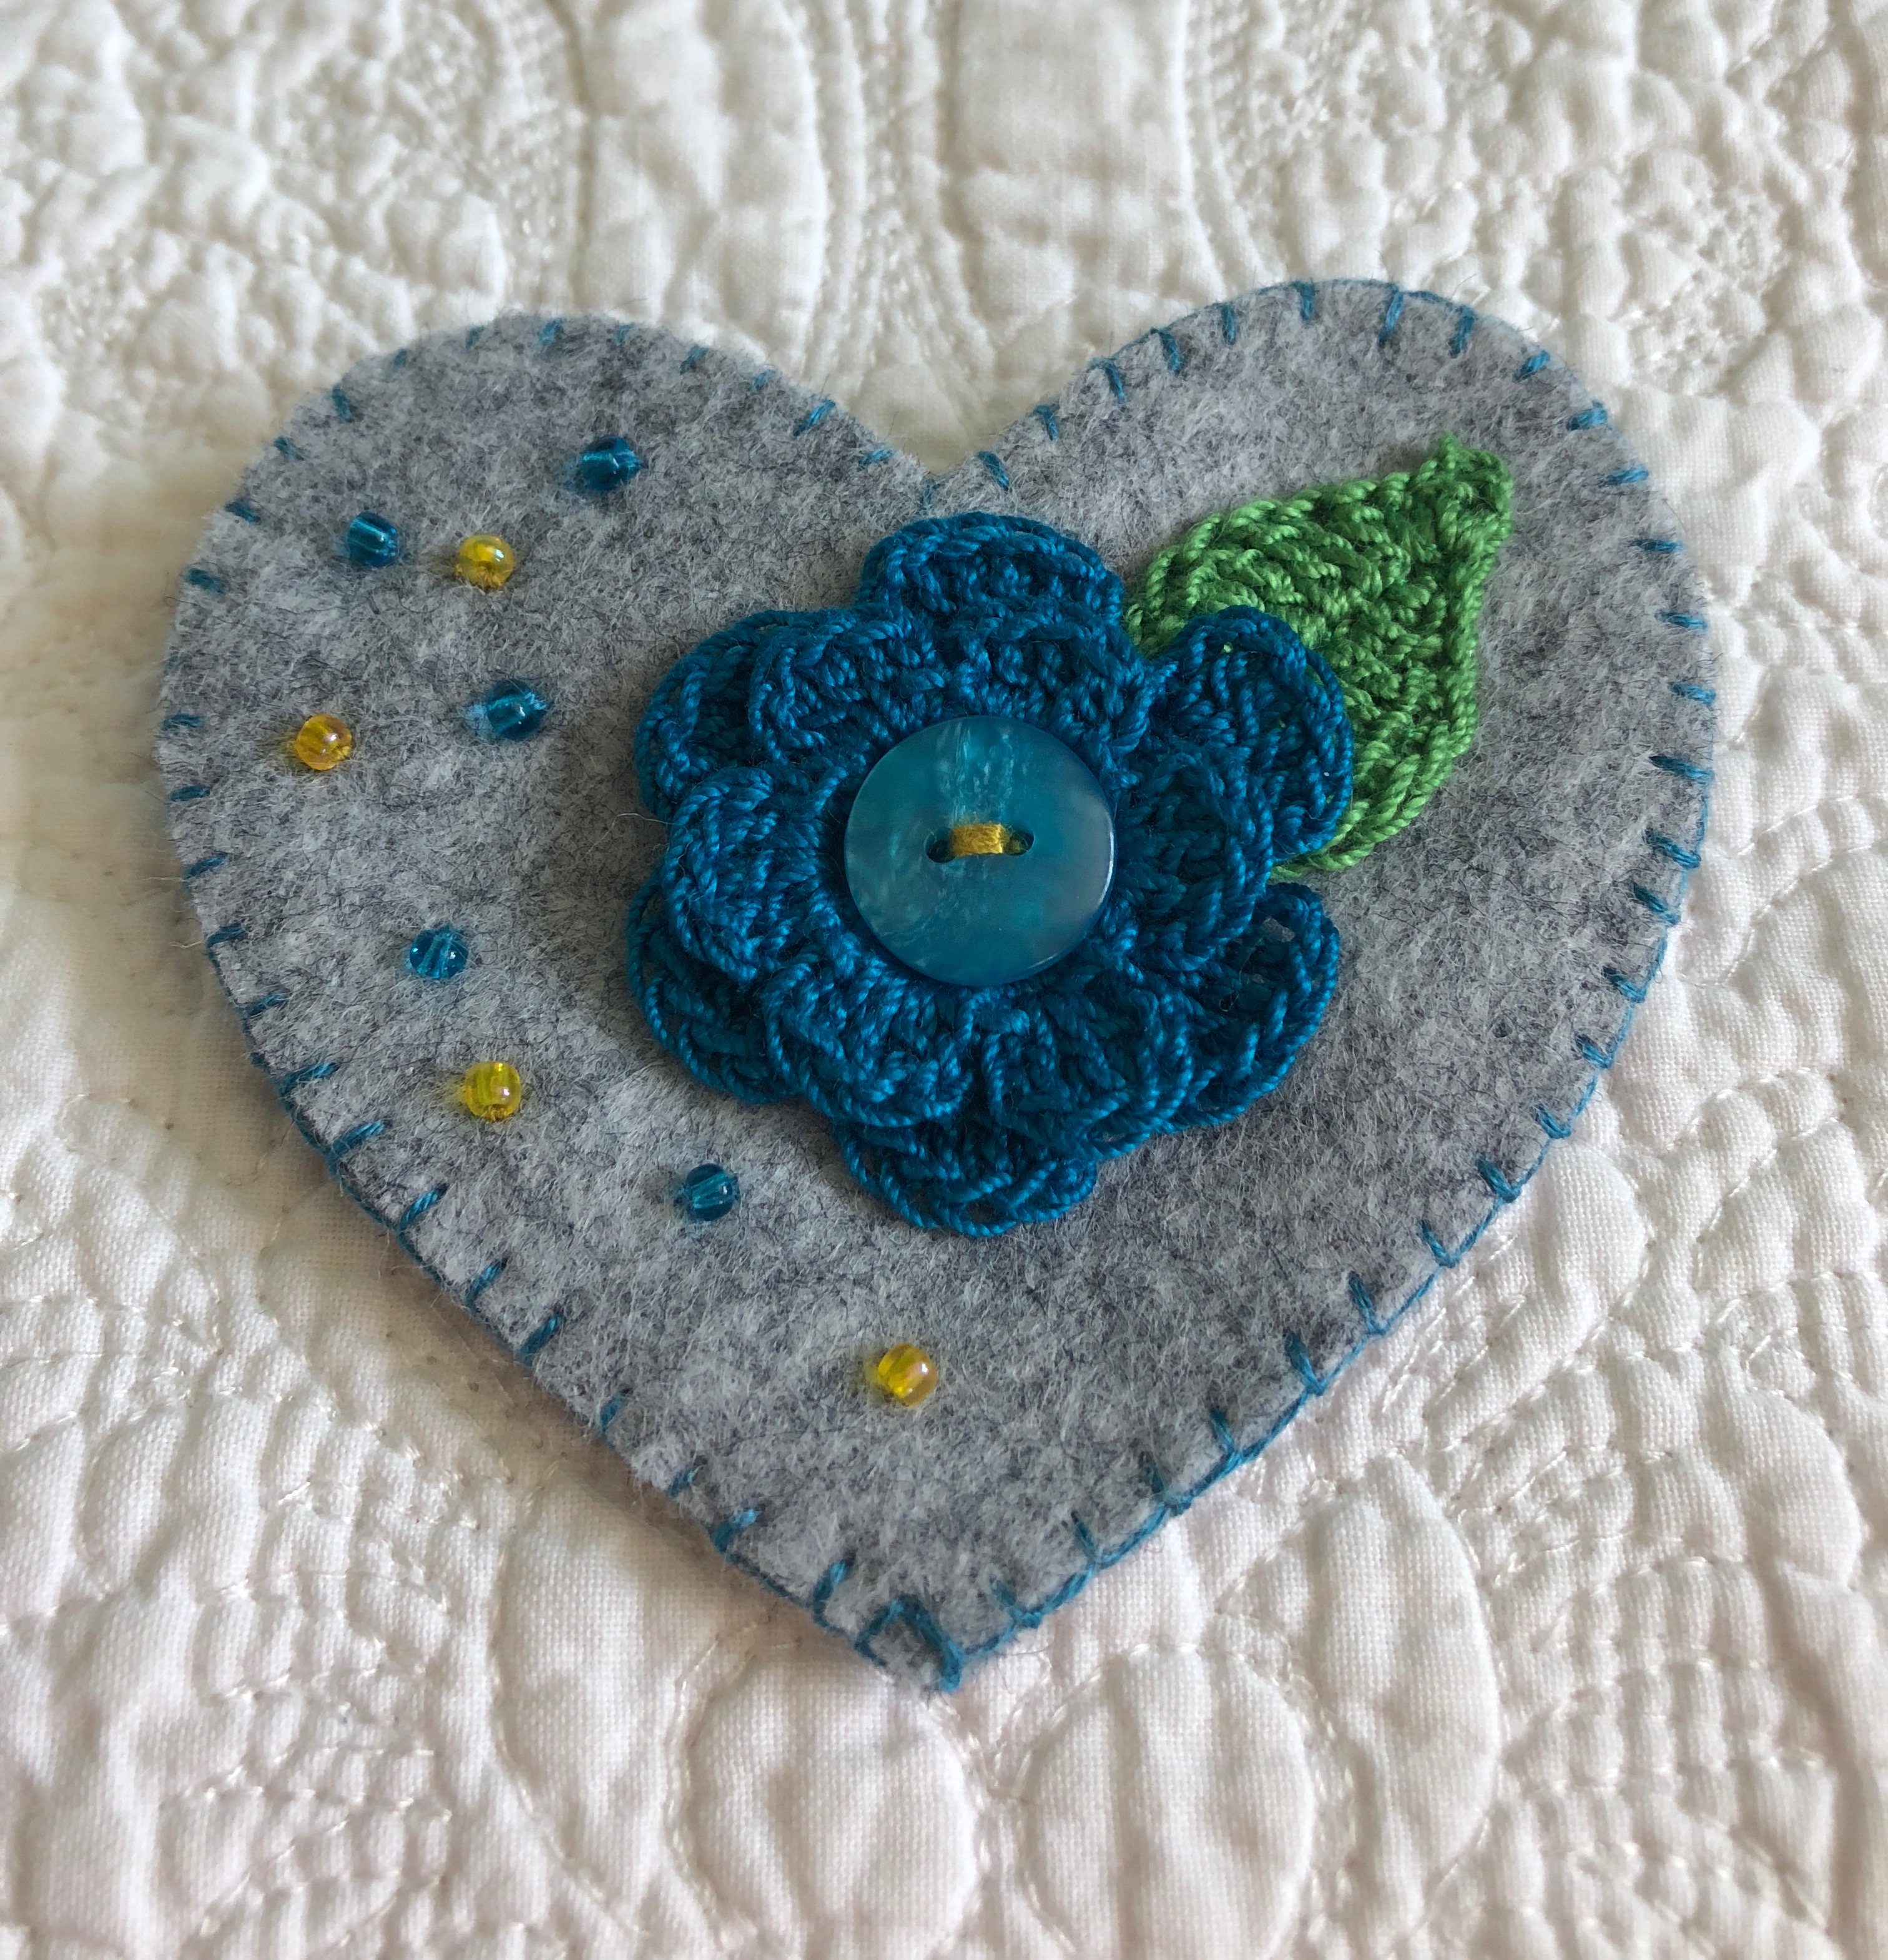 Handmade and hand stitched grey felt heart with a blue crocheted flower and green leaf embellished with a button and tiny glass beads.